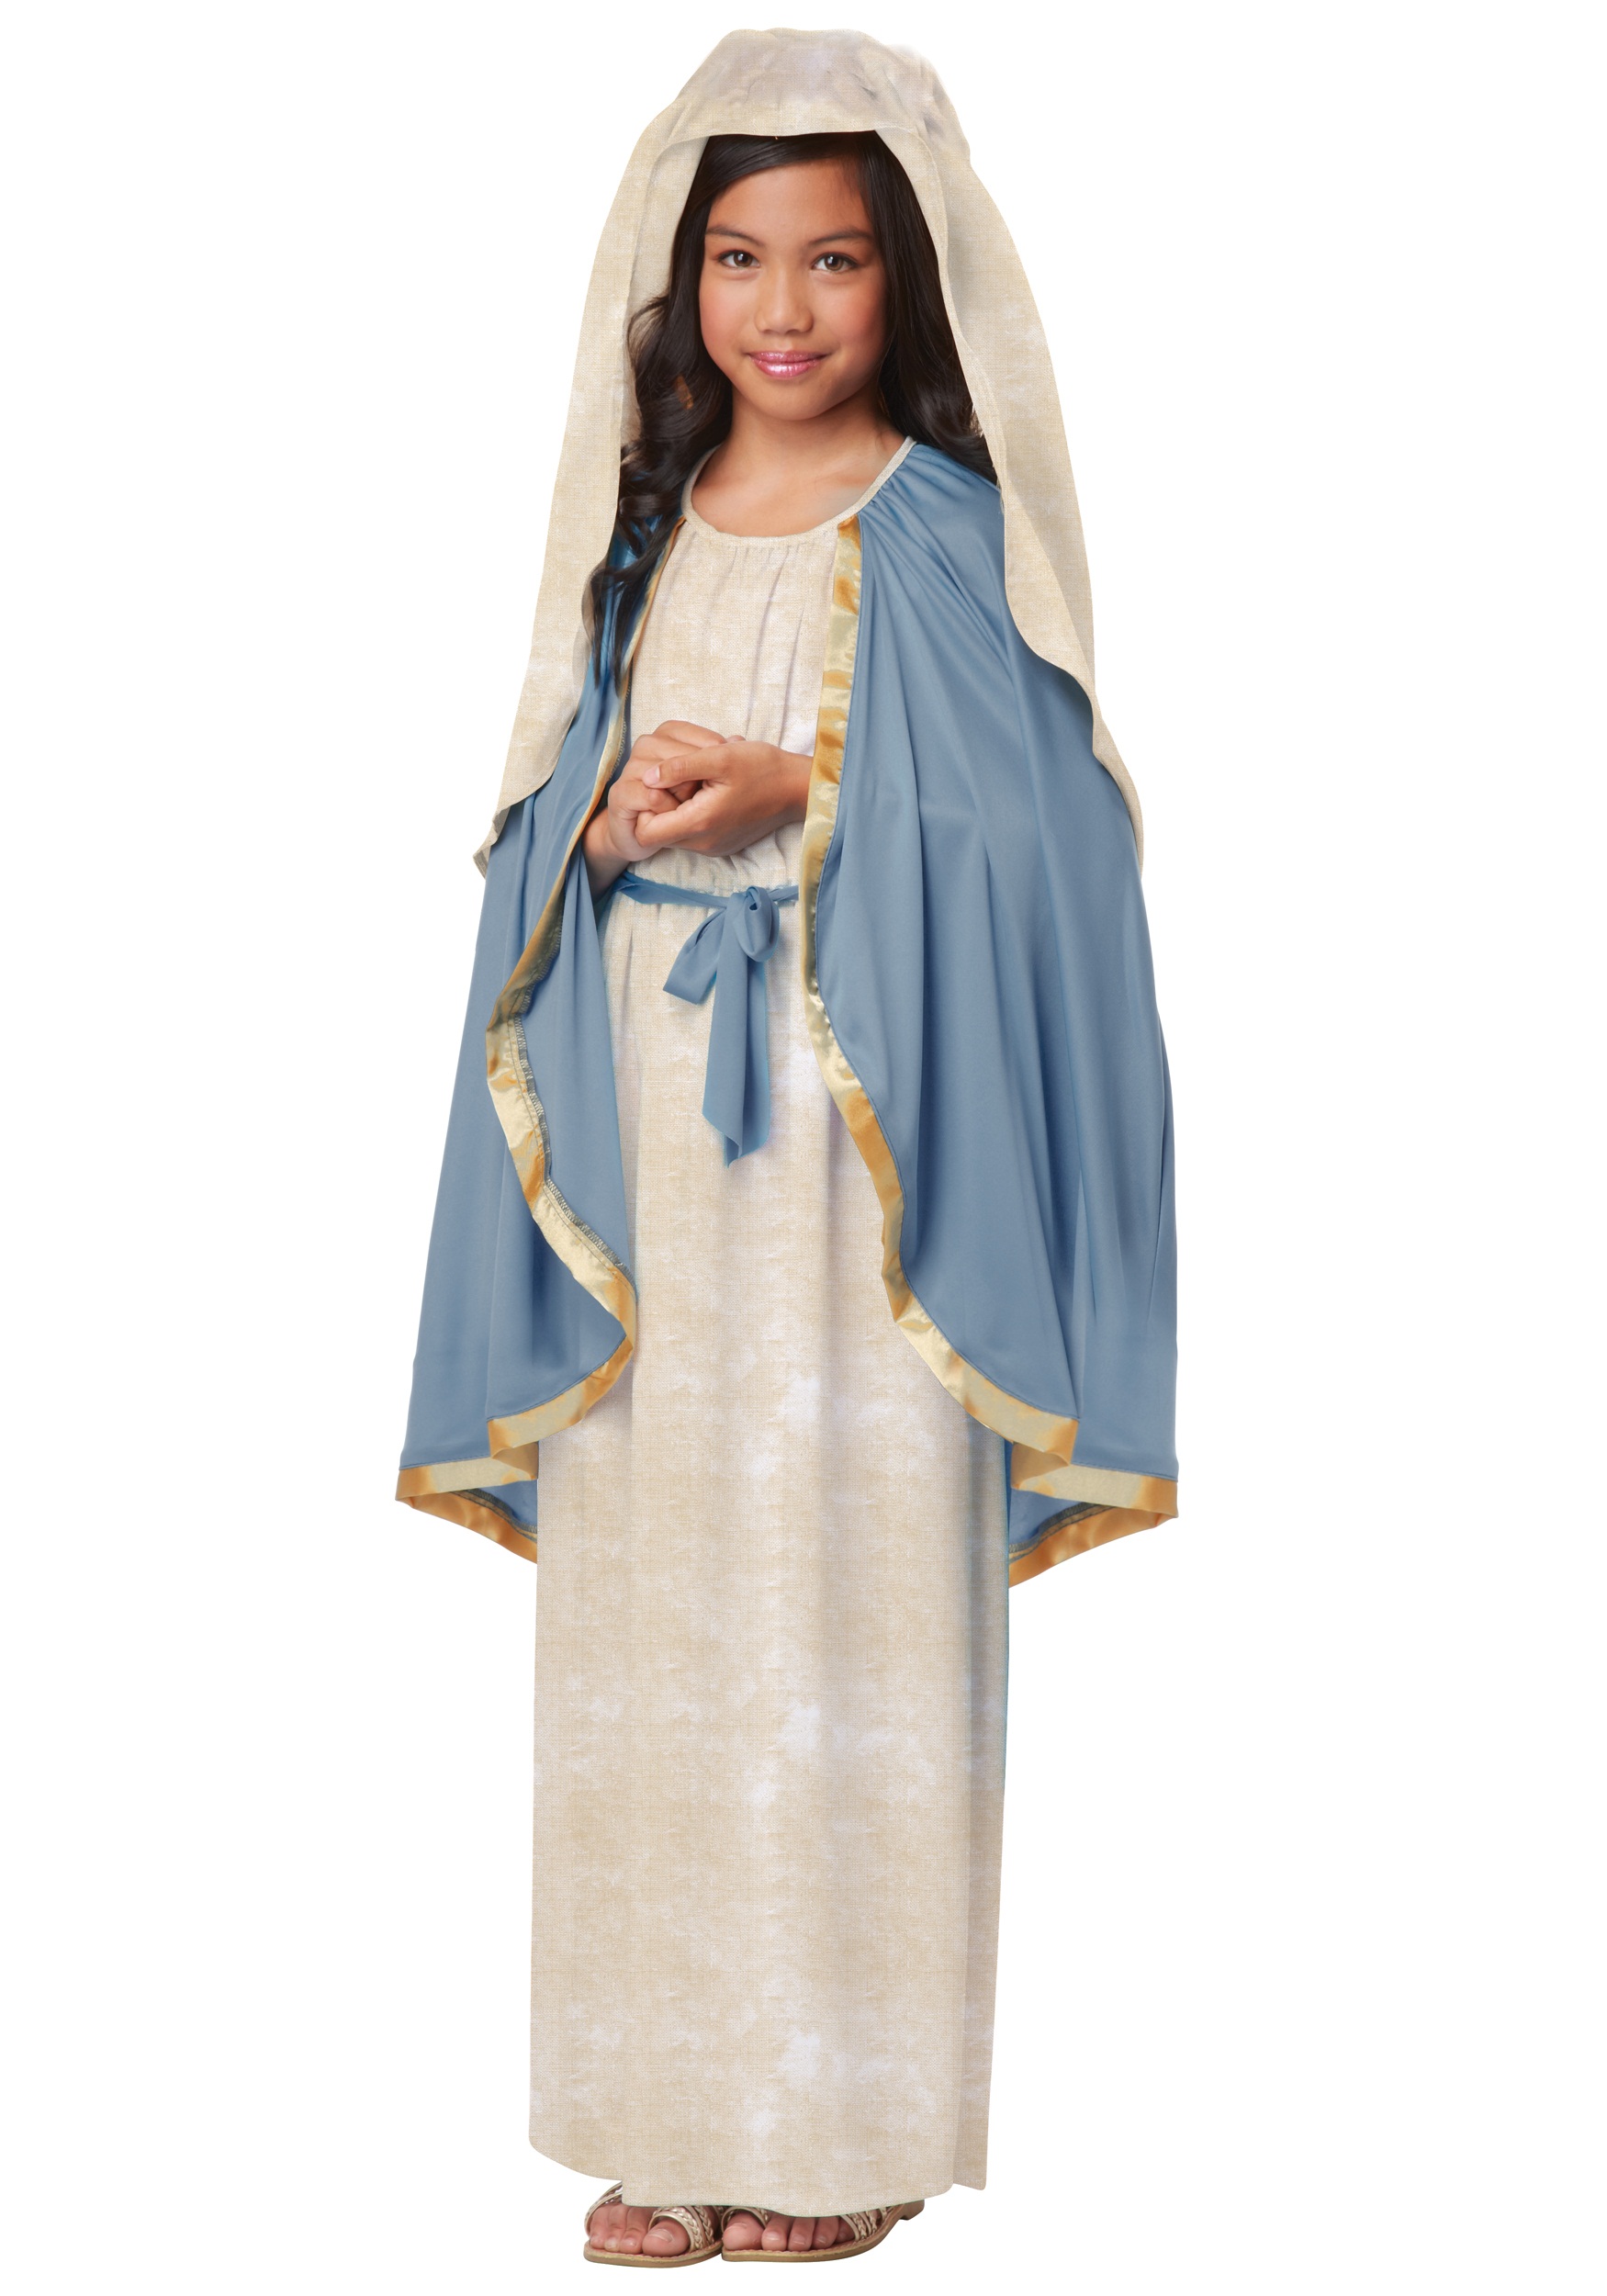 Photos - Fancy Dress California Costume Collection Virgin Mary Costume for Girls Blue/White 